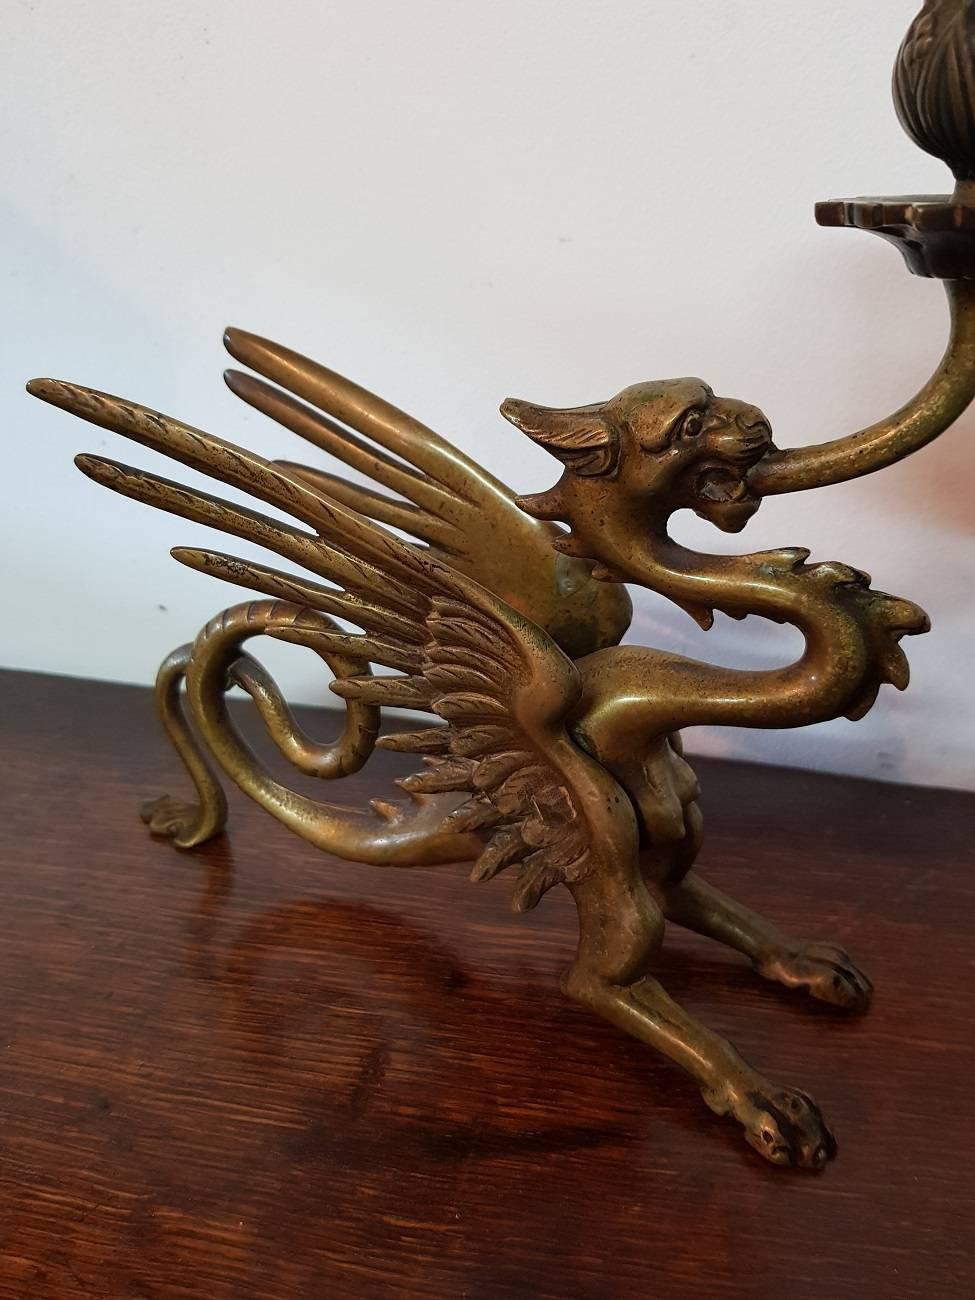 Pair of two awesome 19th century bronze dragon candlesticks with nice detailed design.

The measurements are,
Depth 21 cm/ 8.2 inch.
Width 7 cm/ 2.7 inch.
Height 20 cm/ 7.8 inch.
      